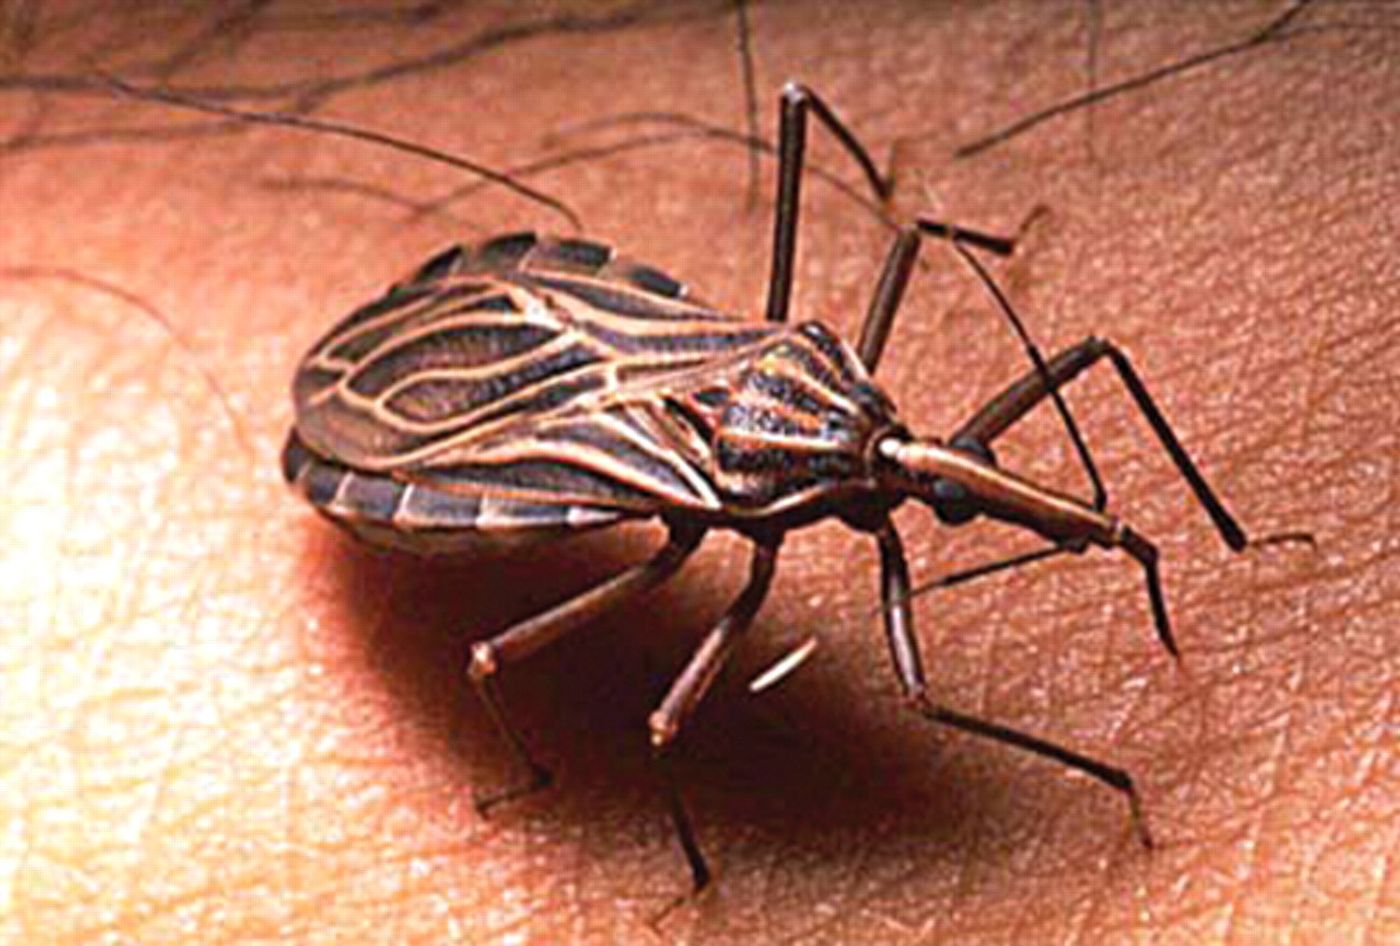 Chagas disease generally spreads through insects known as Triatominae or kissing bugs. Source: OMICS International